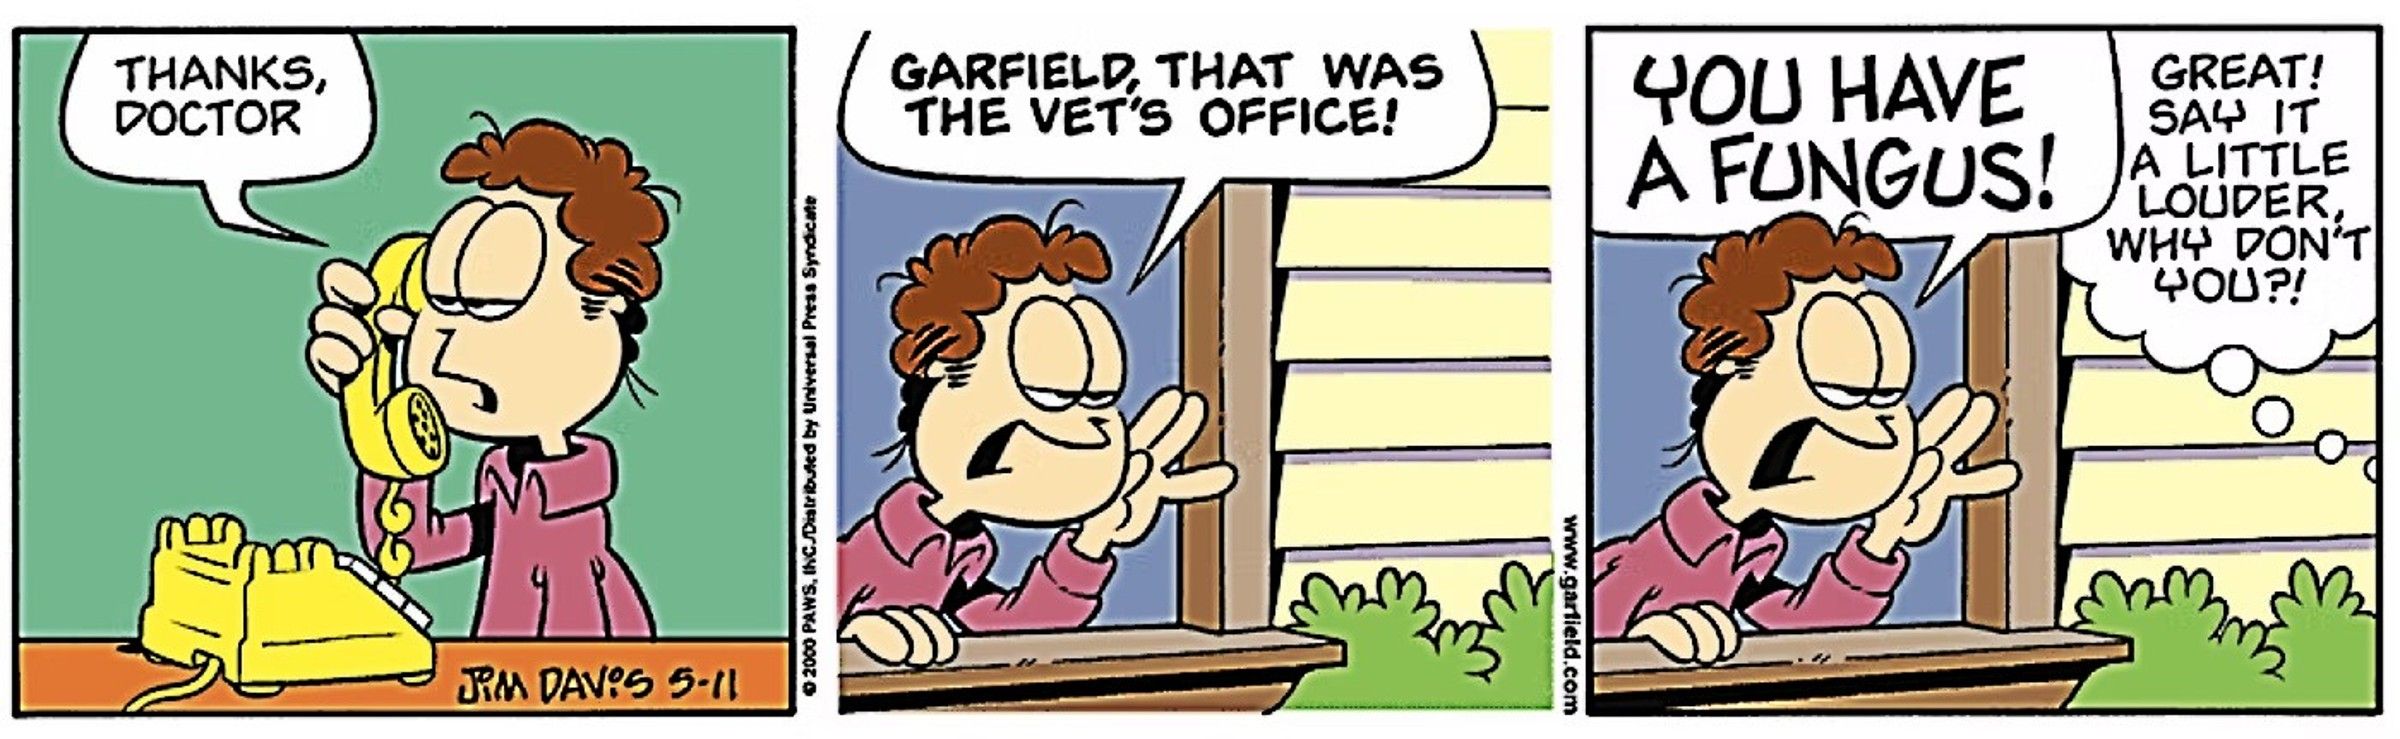 Jon shouts out the window to loudly tell Garfield he has a fungus 